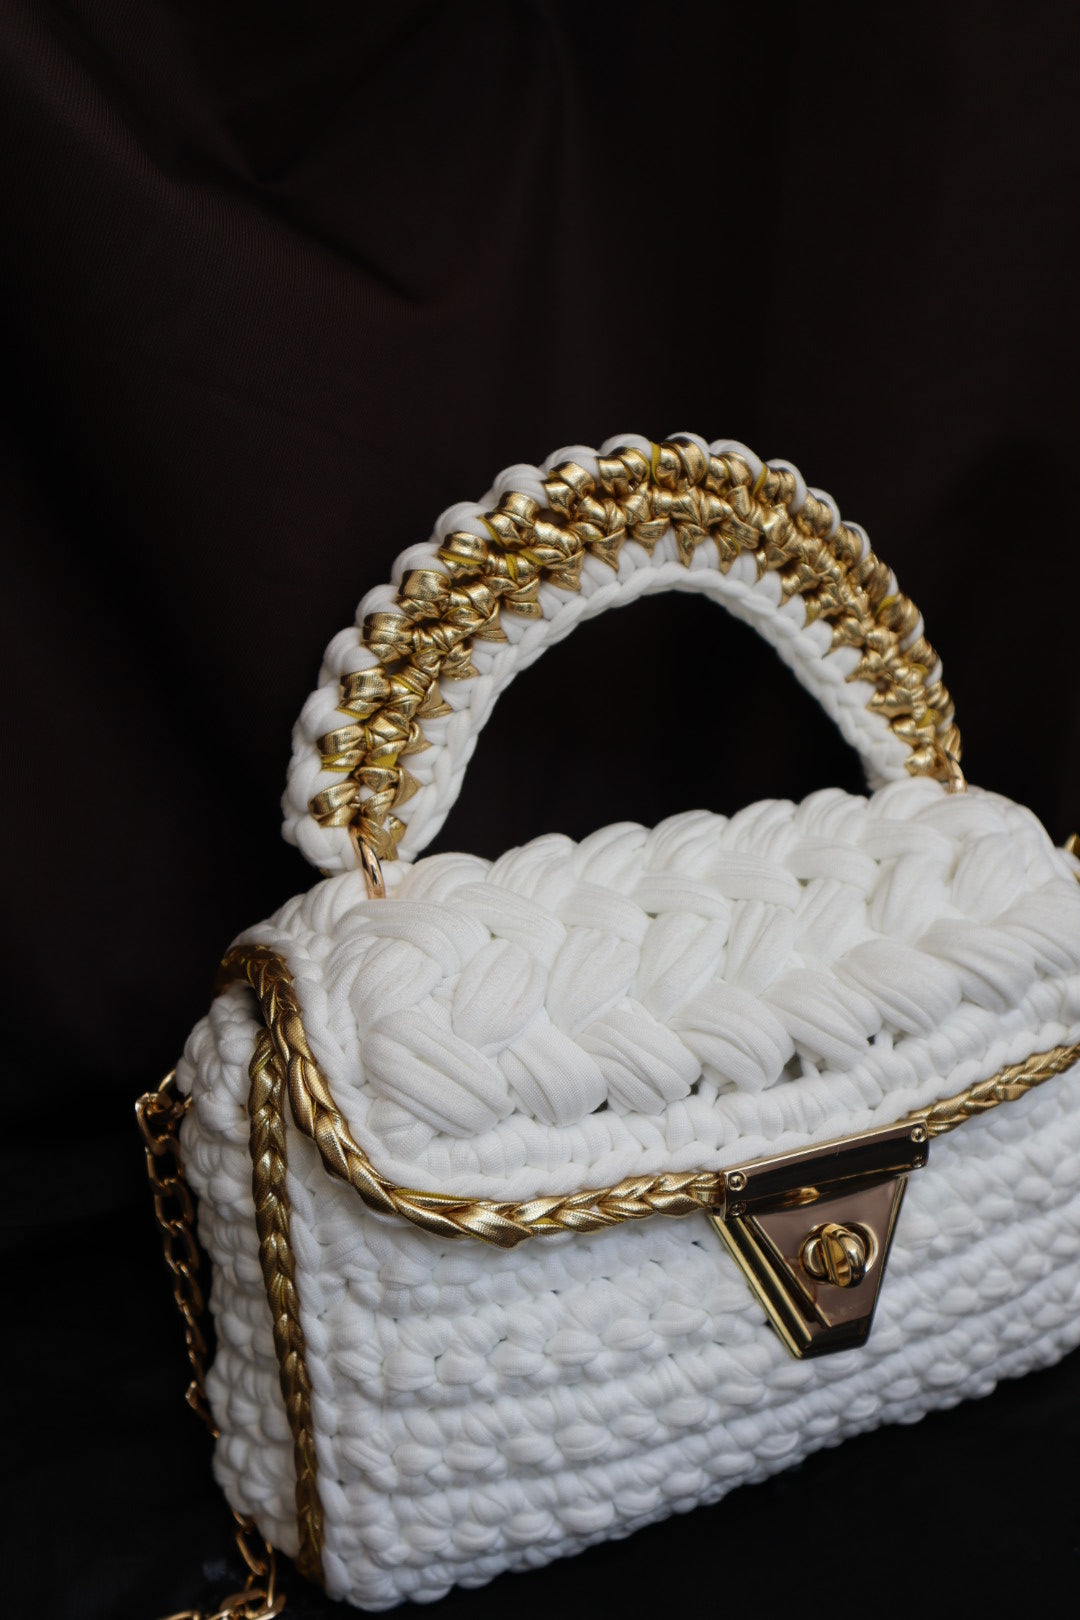 Elegant White and Gold Handcrafted Crochet Bag